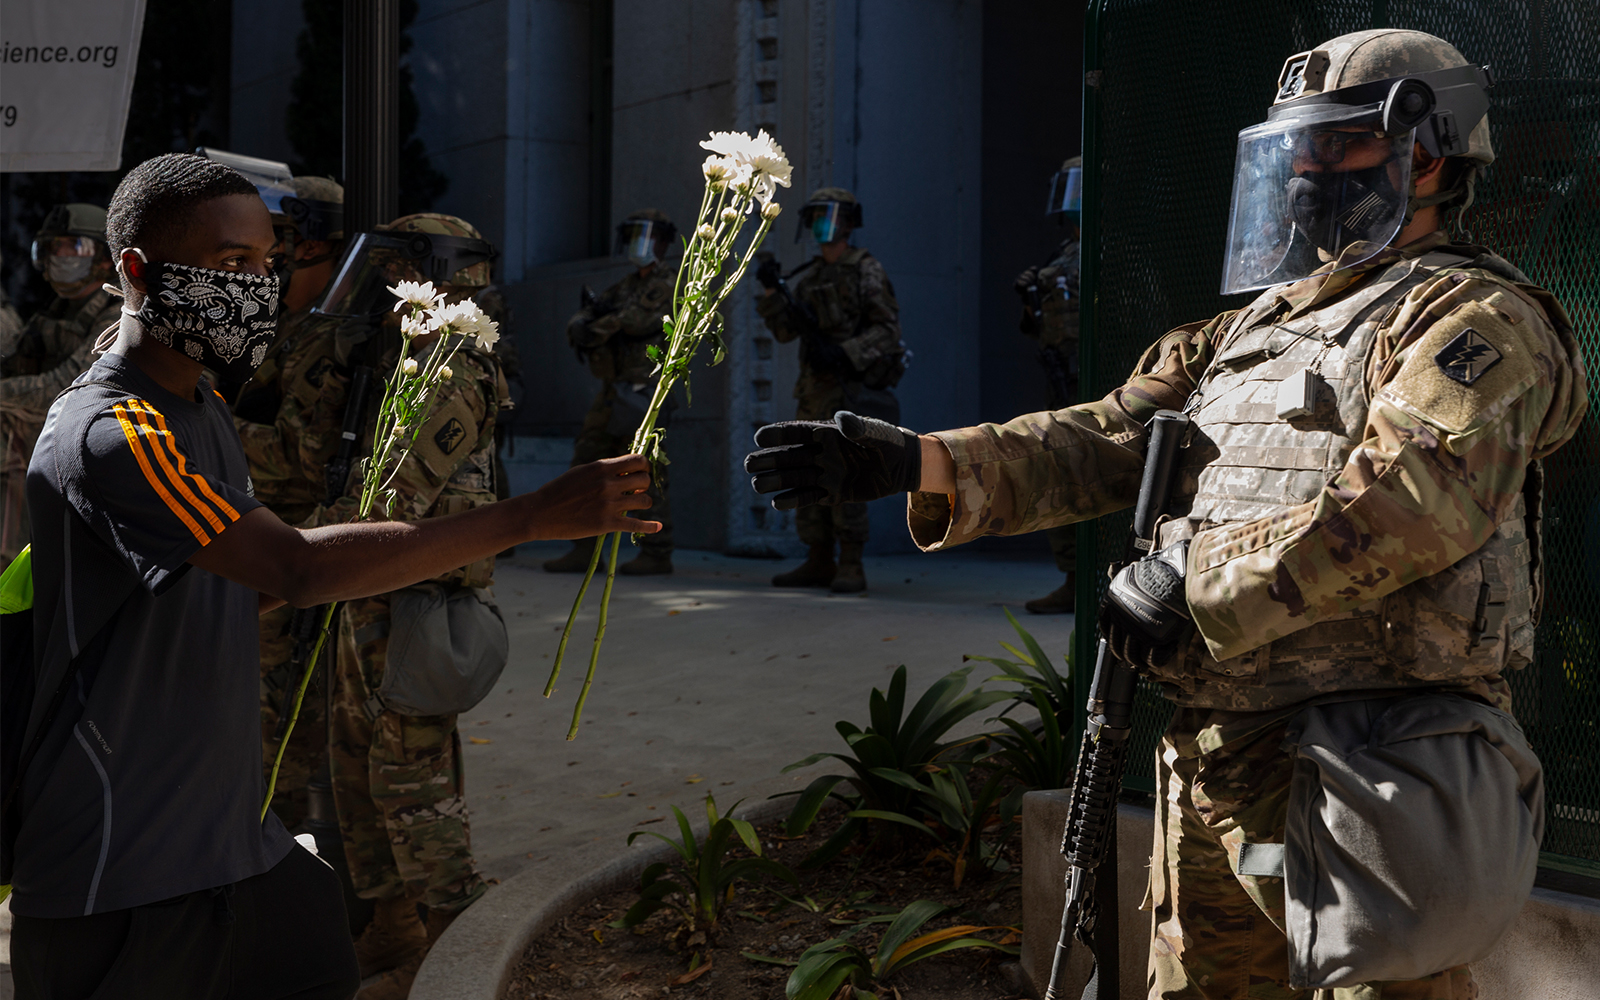 A demonstrator offers flowers to a National Guardsman stationed outside the office of Los Angeles County District Attorney Jackie Lacey, June 3, 2020, in Los Angeles, during a protest over the death of George Floyd. (AP/Damian Dovarganes)